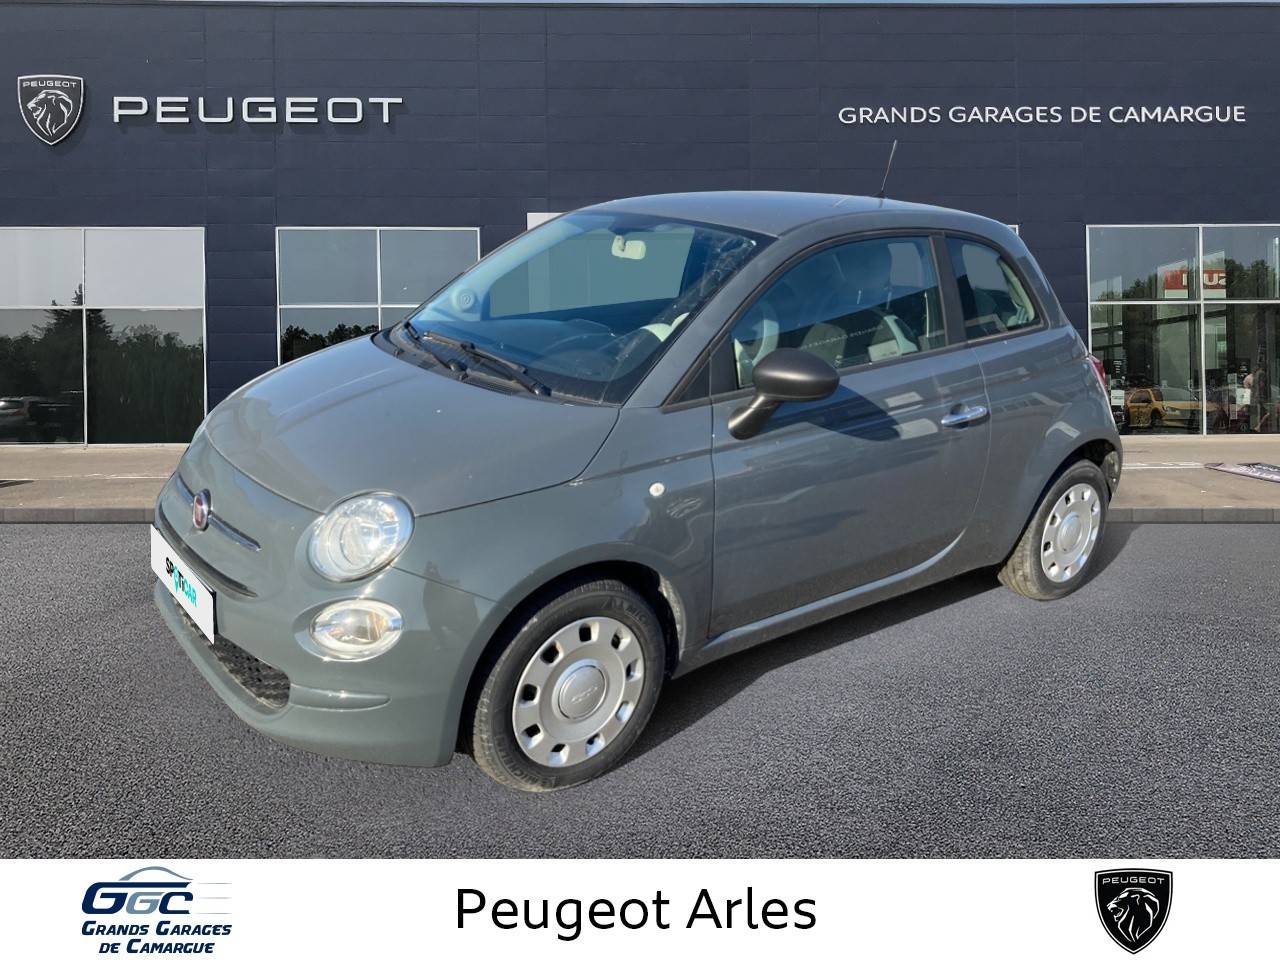 FIAT 500 | 500 1.2 69 ch S/S occasion - Peugeot Arles